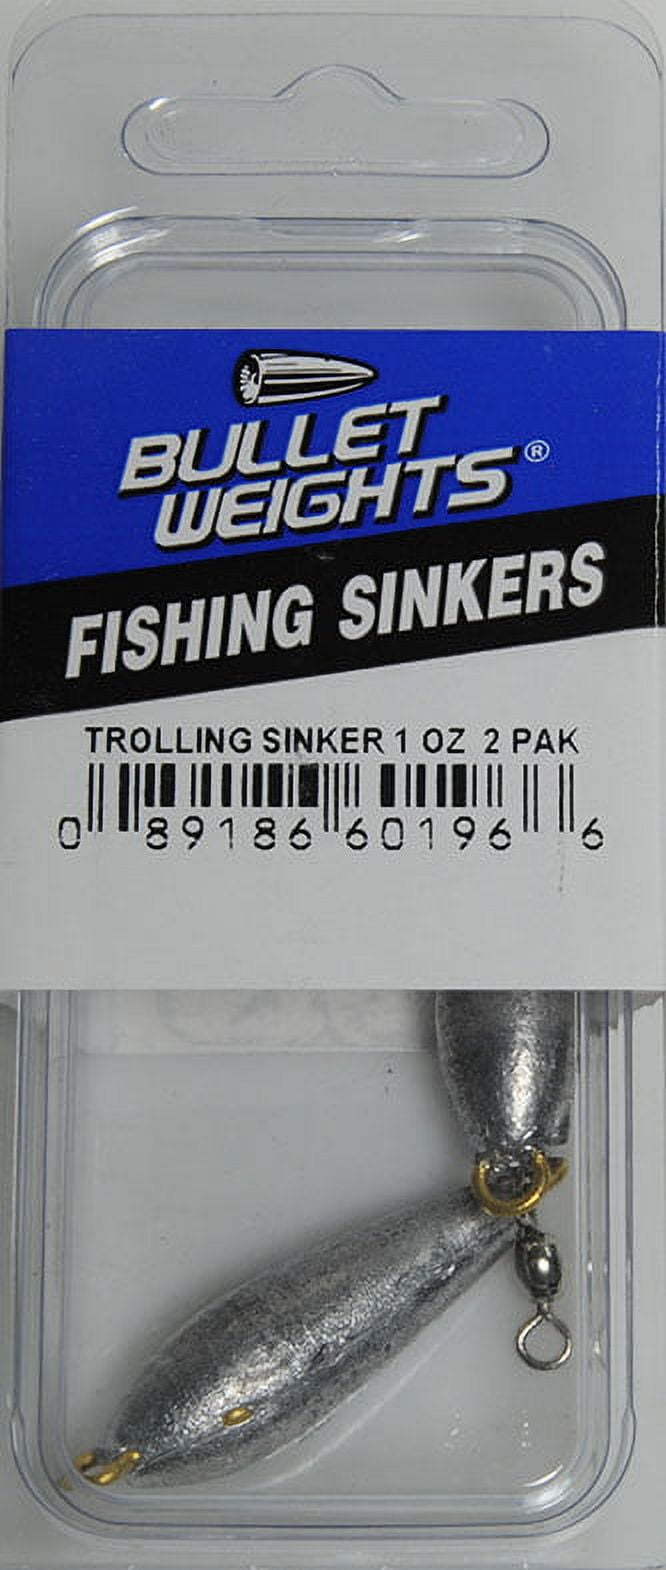 Bullet Weights® SRC9 Lead Ring Sinkers,1 oz Fishing Weights